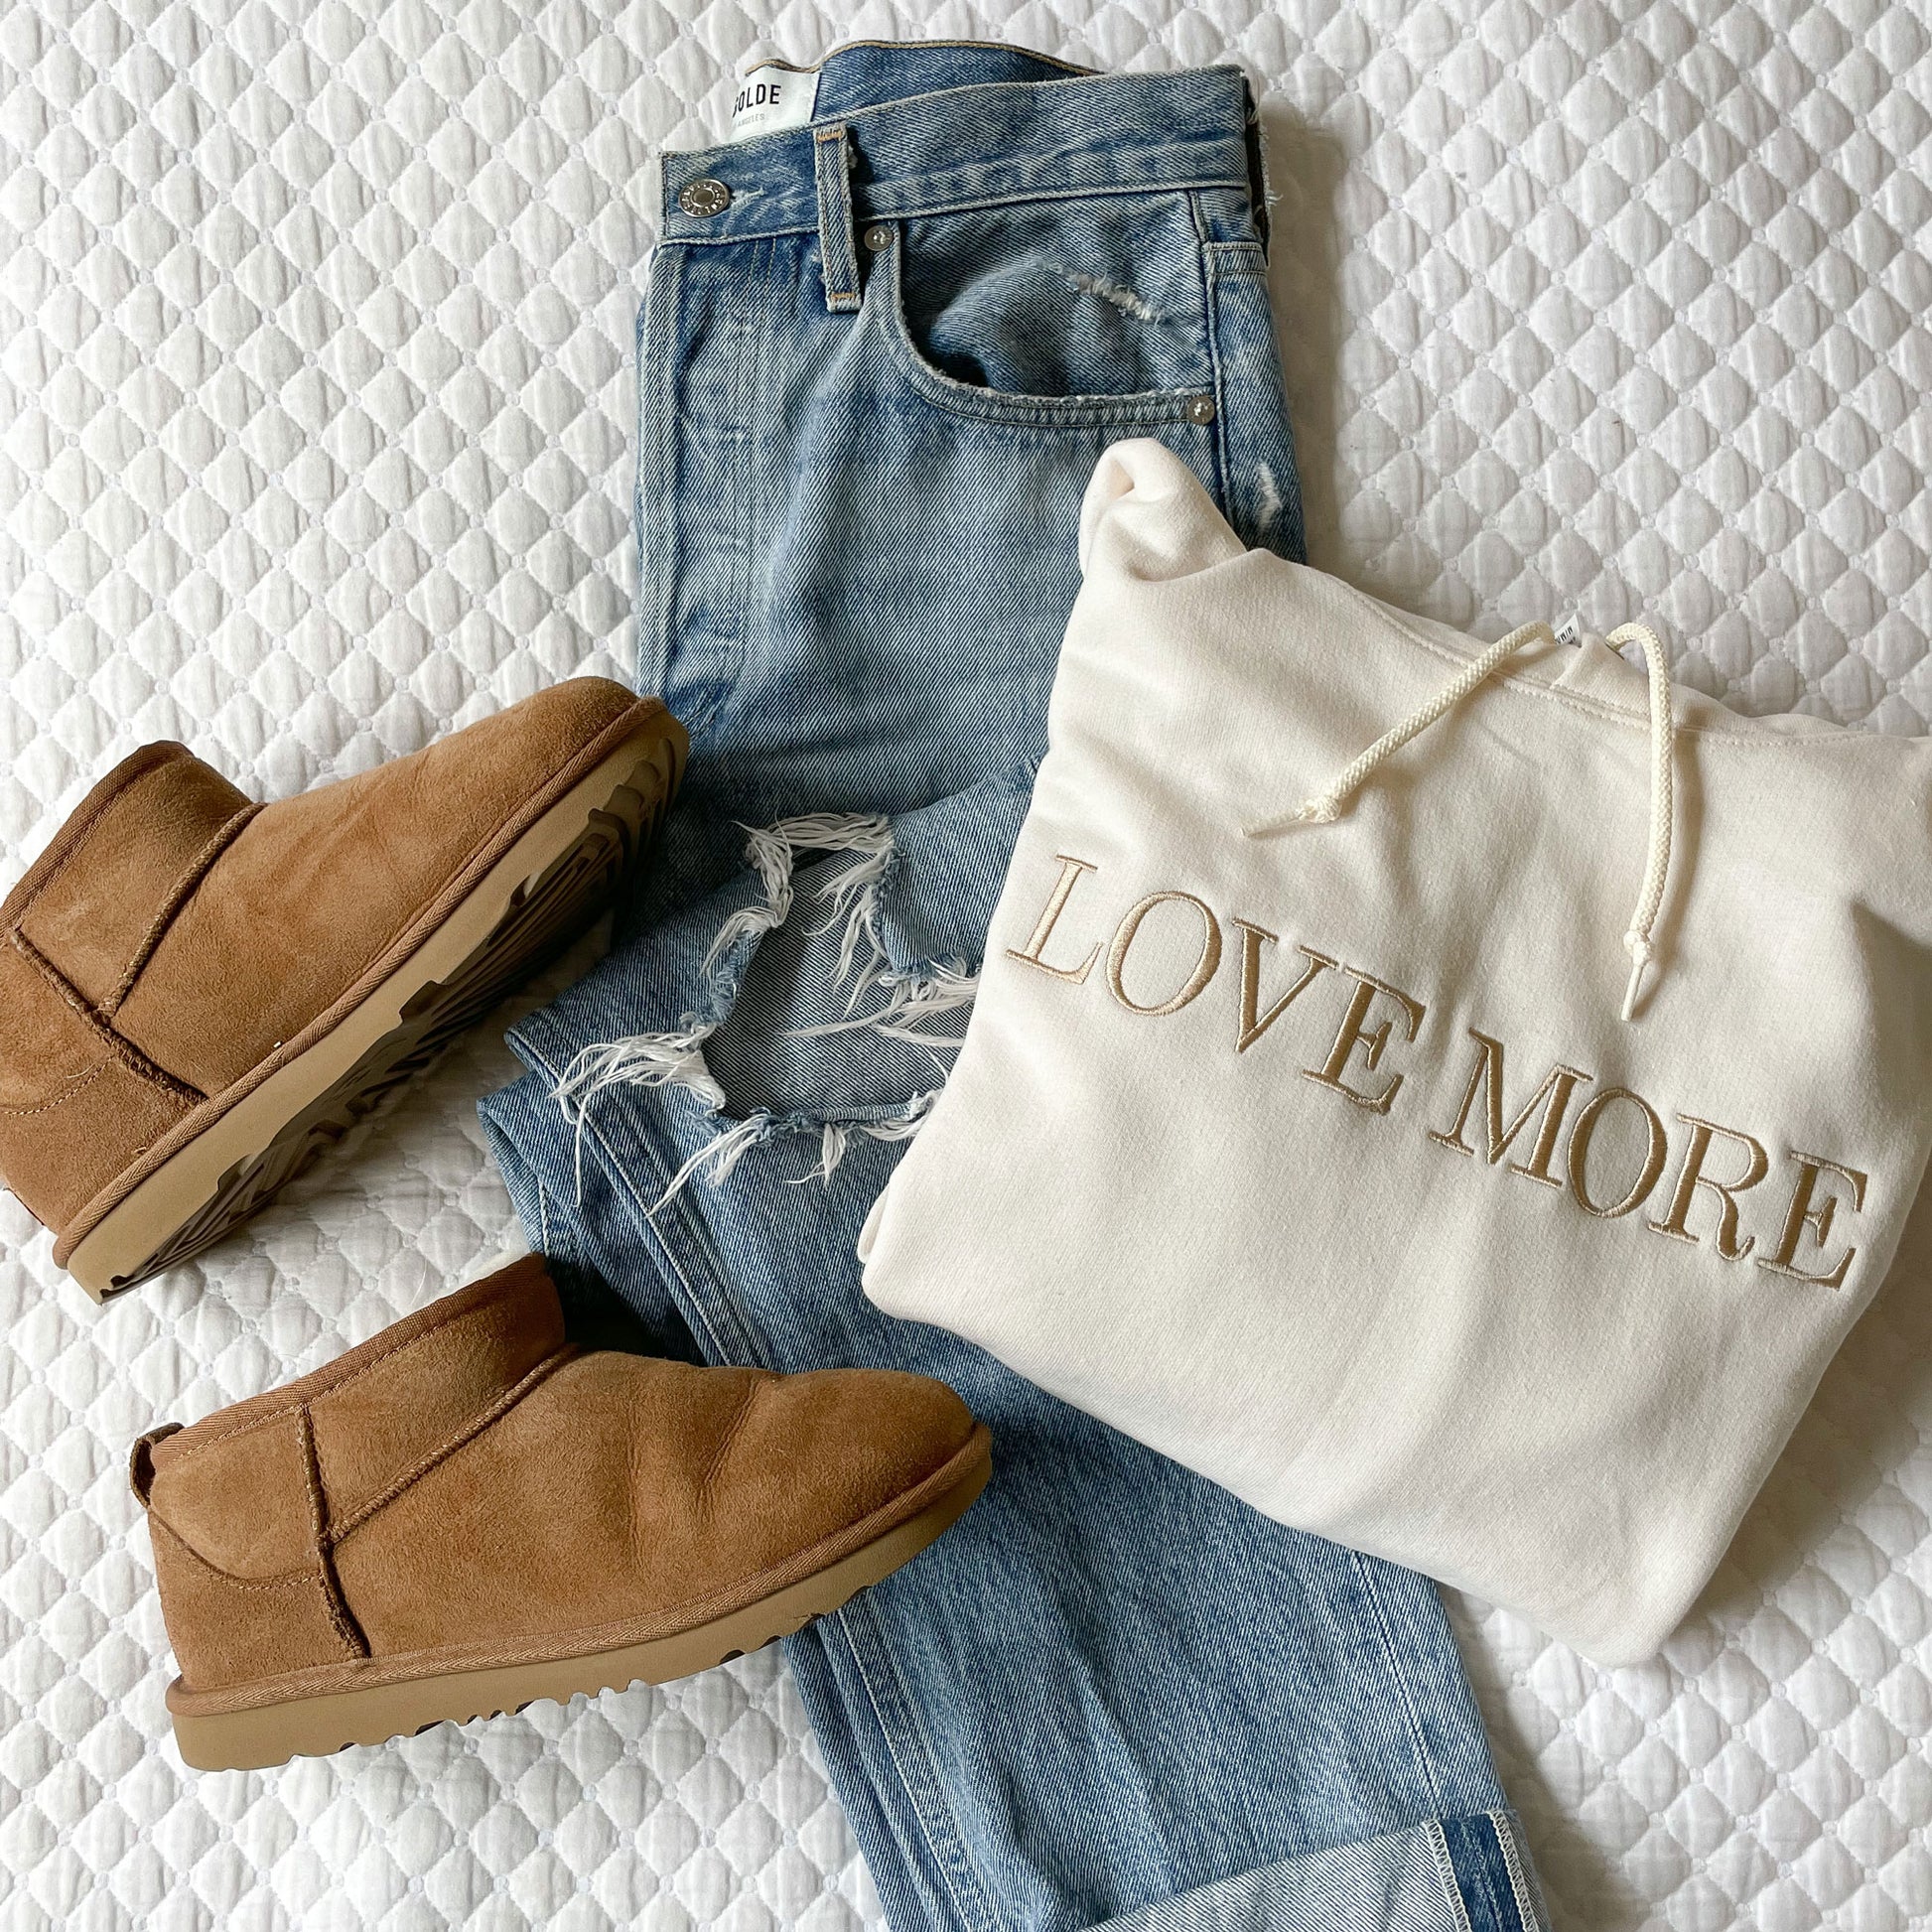 styled flat lay image of jeans and ugg boots with a white hoodie that has the text Love More embroidered across the chest